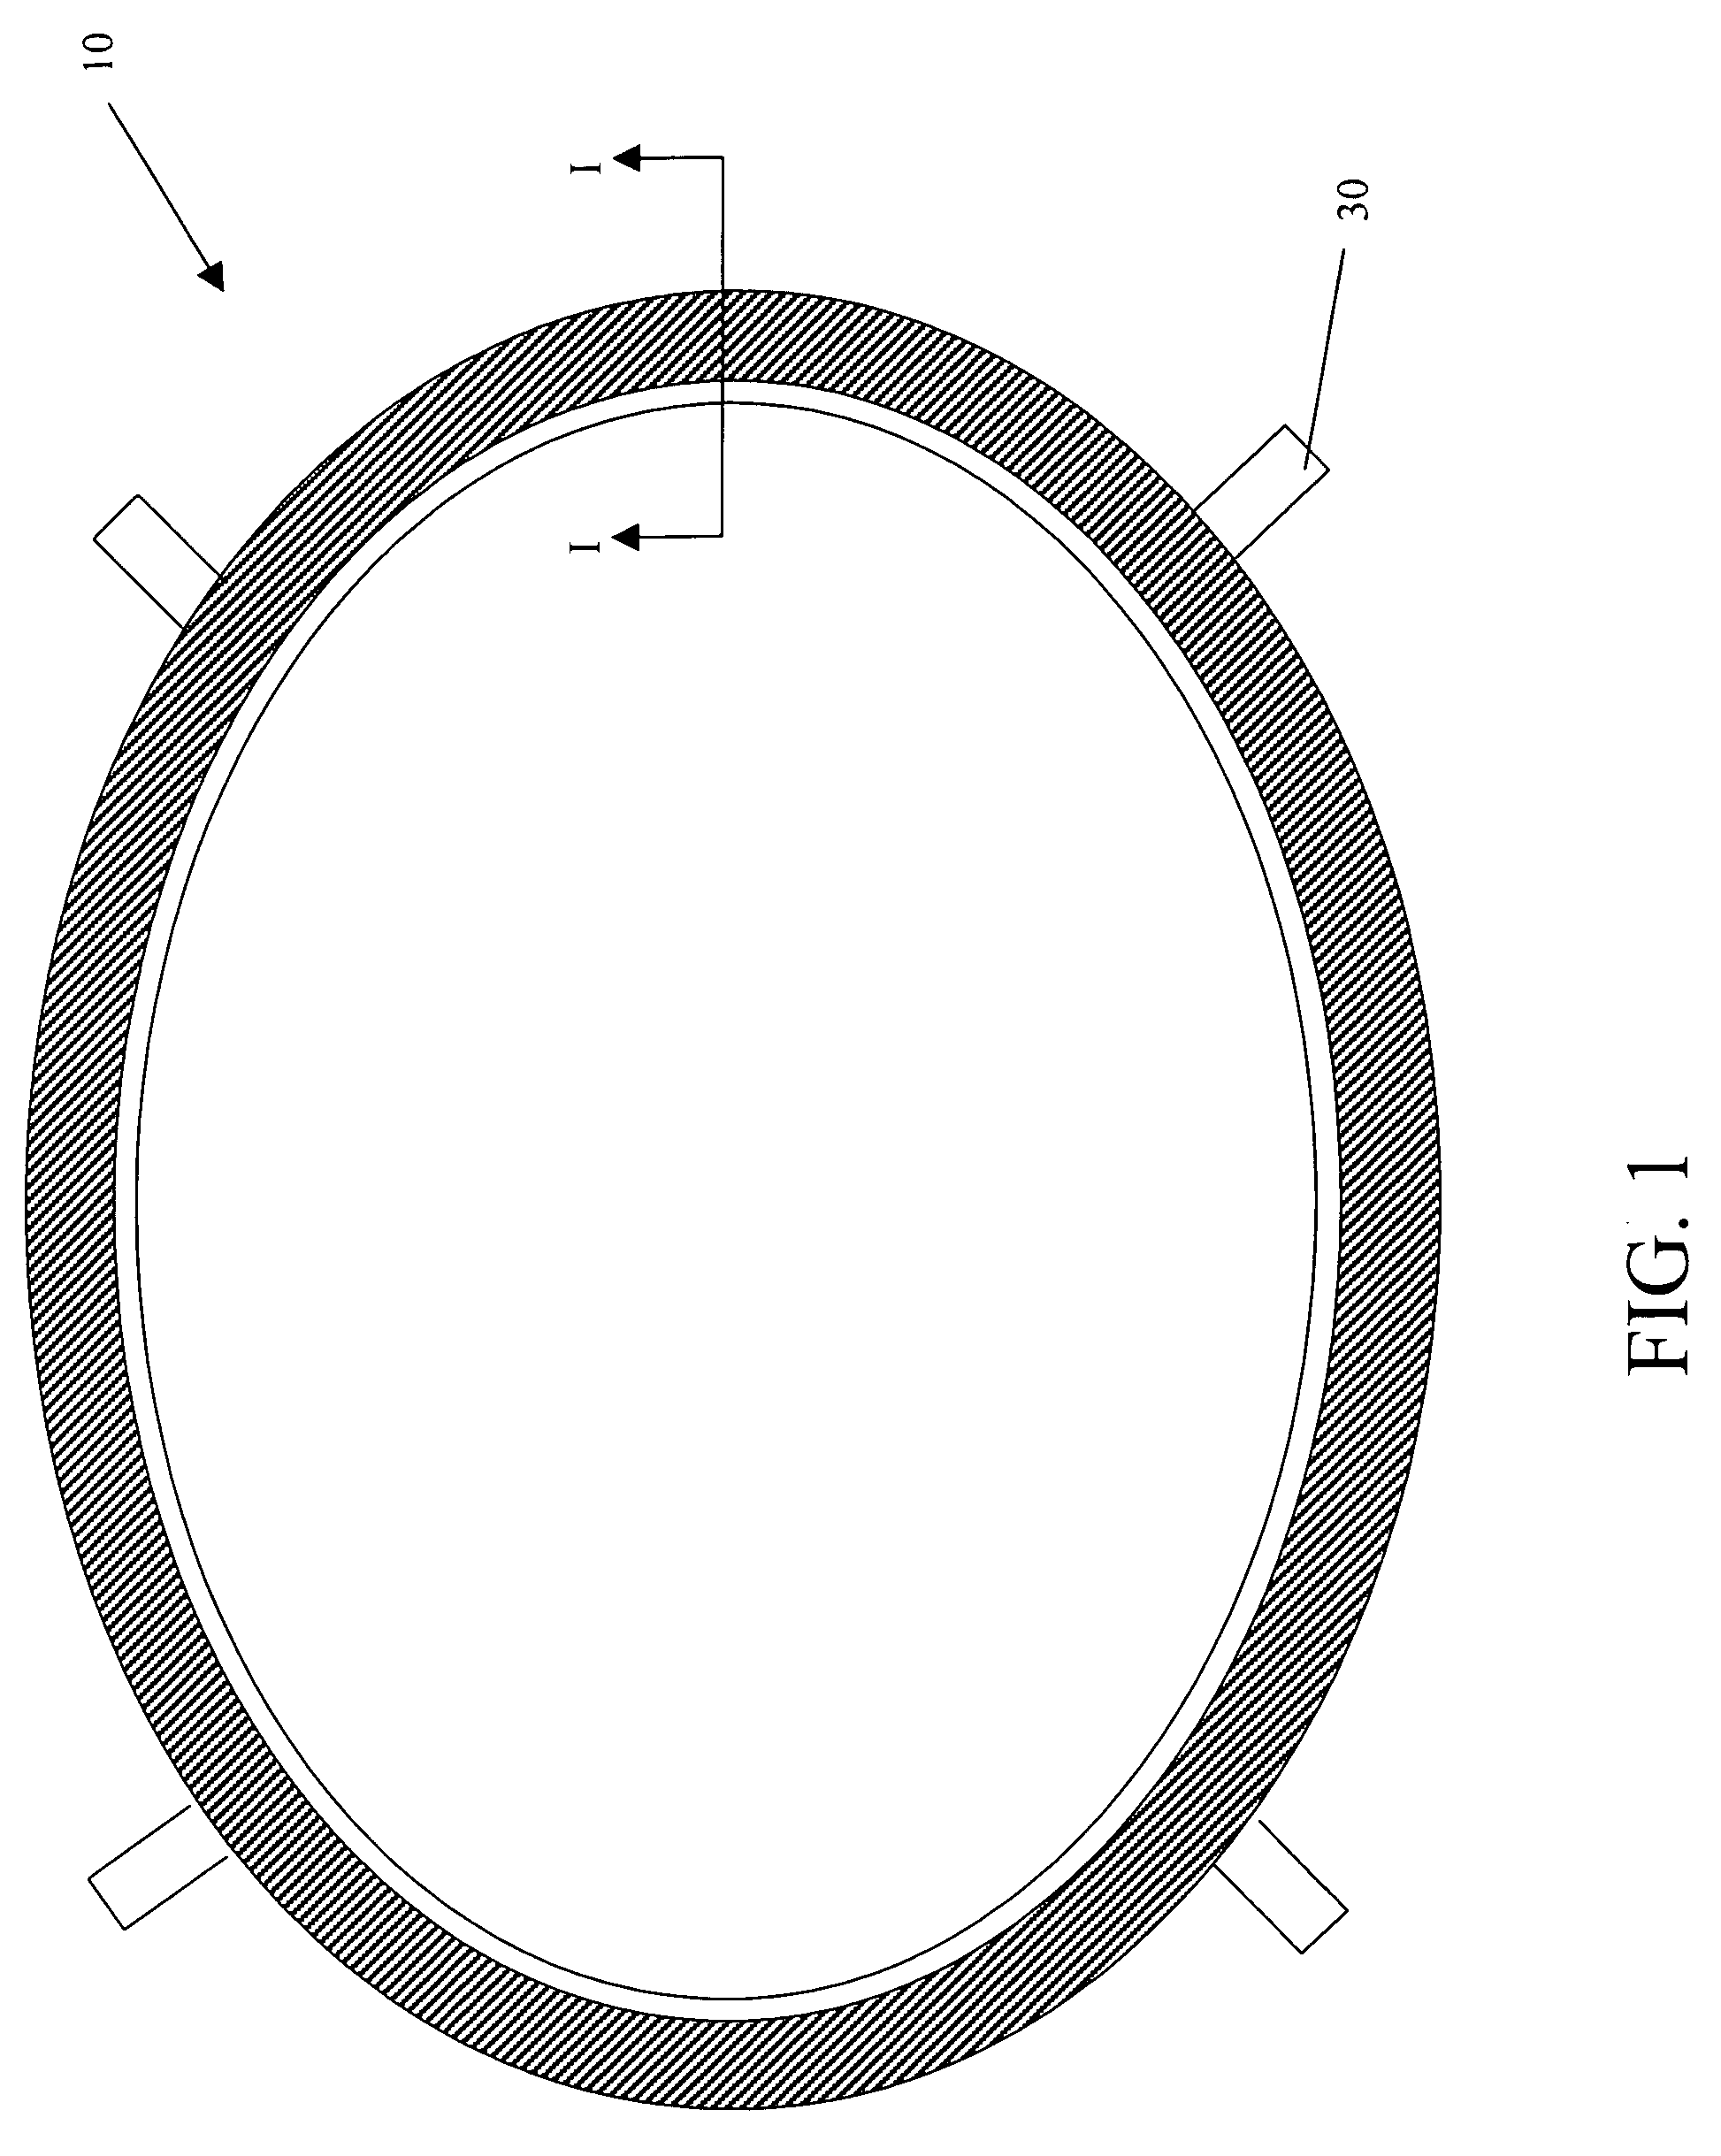 Gasket of non-rounded shape with installation aids